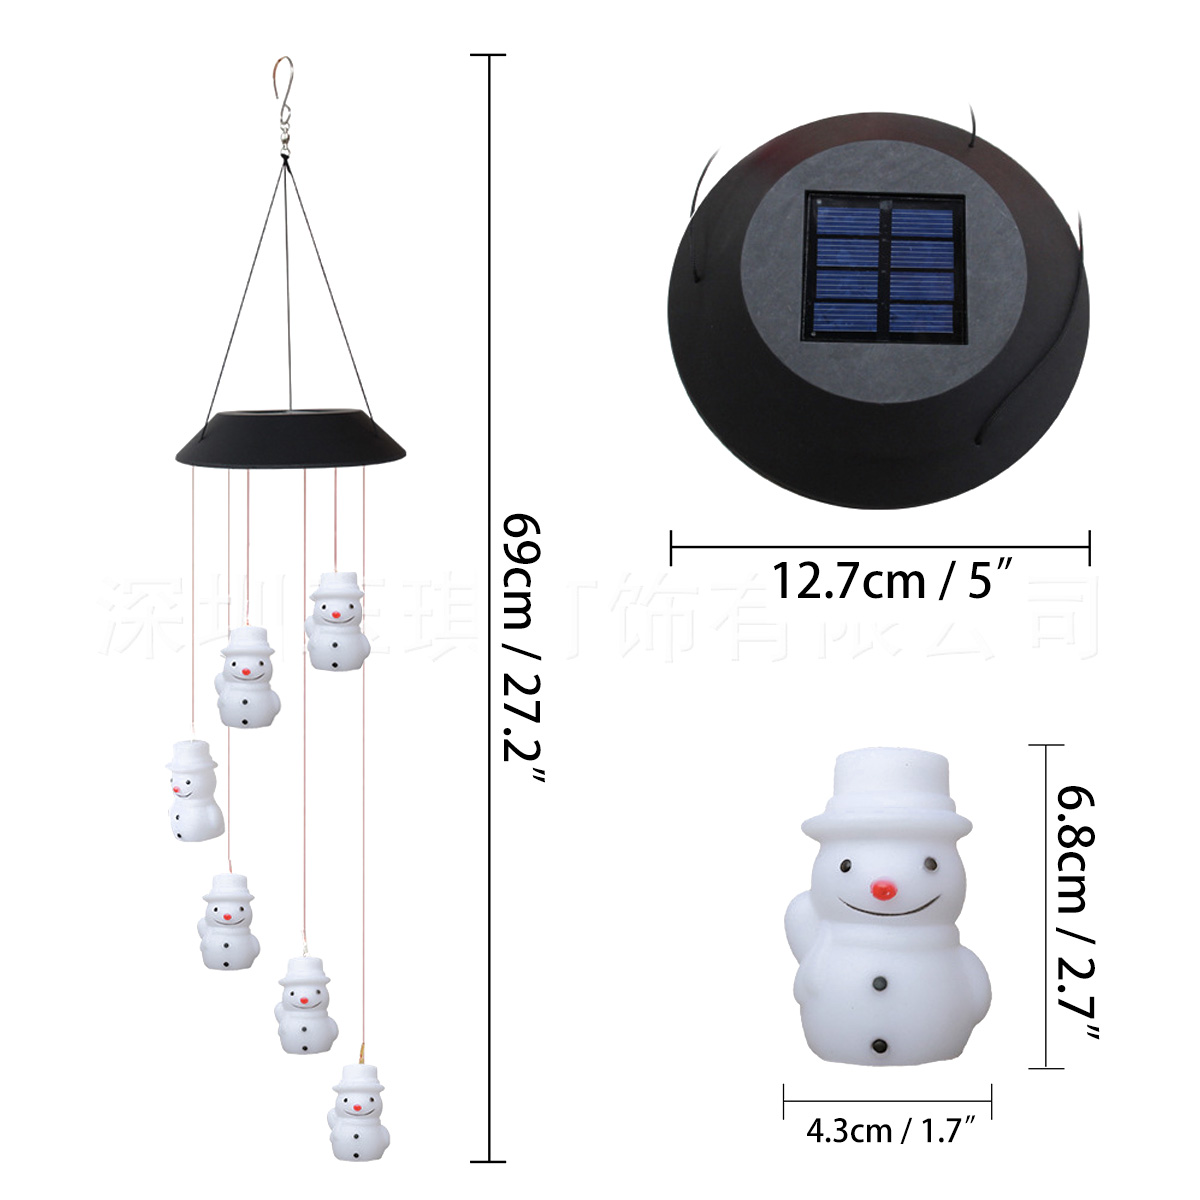 LED-Colour-Changing-Hanging-Wind-Chimes-Solar-Powered-Ball-Lights-Garden-Outdoor-1760757-11